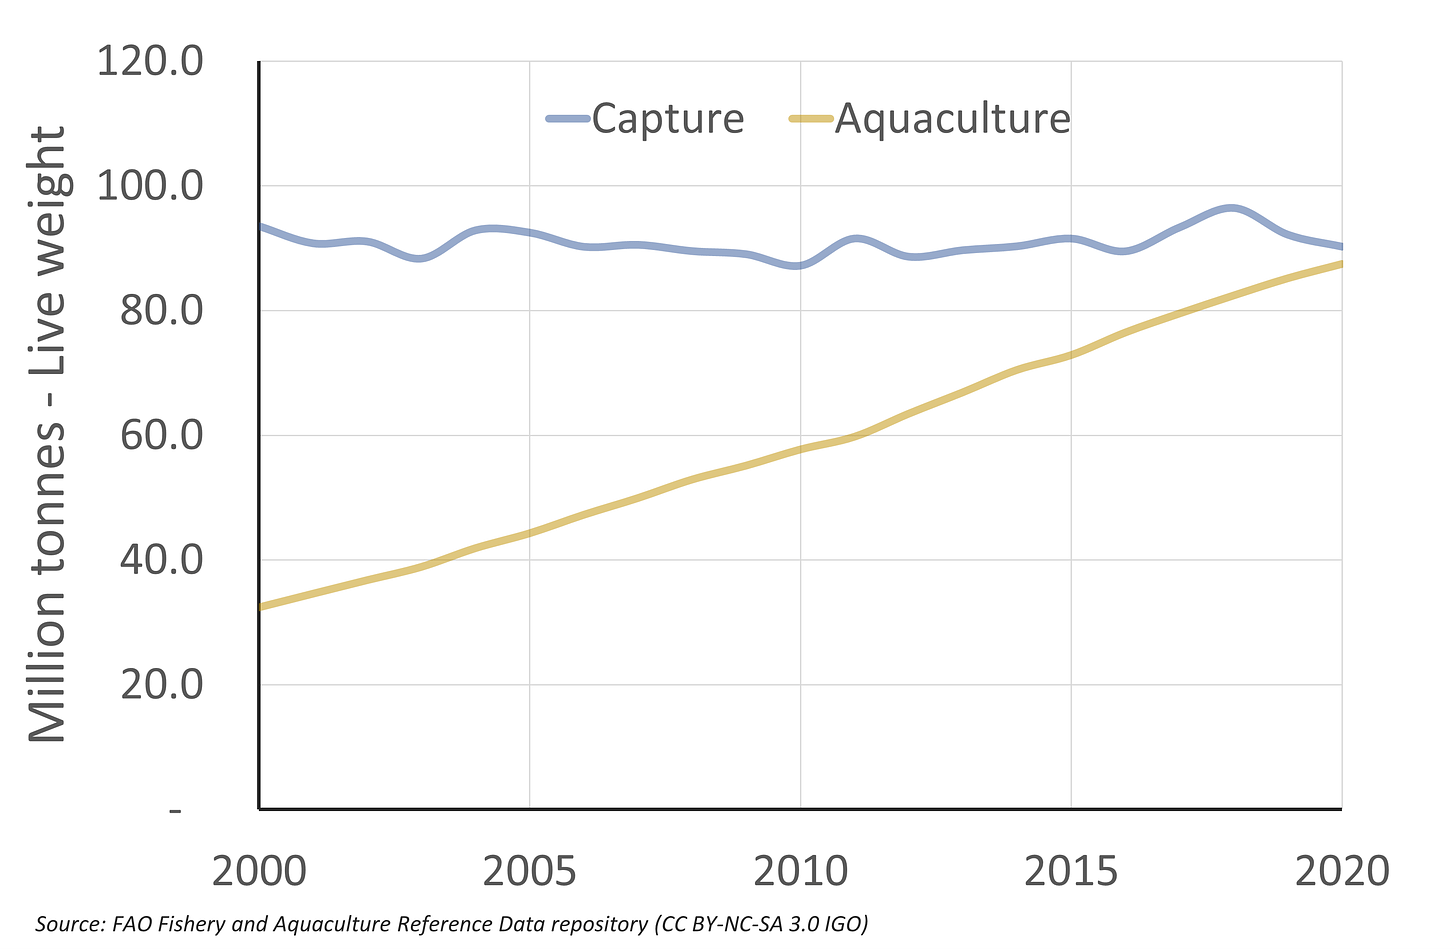 Relative production of caputure fisheries and aquaculture